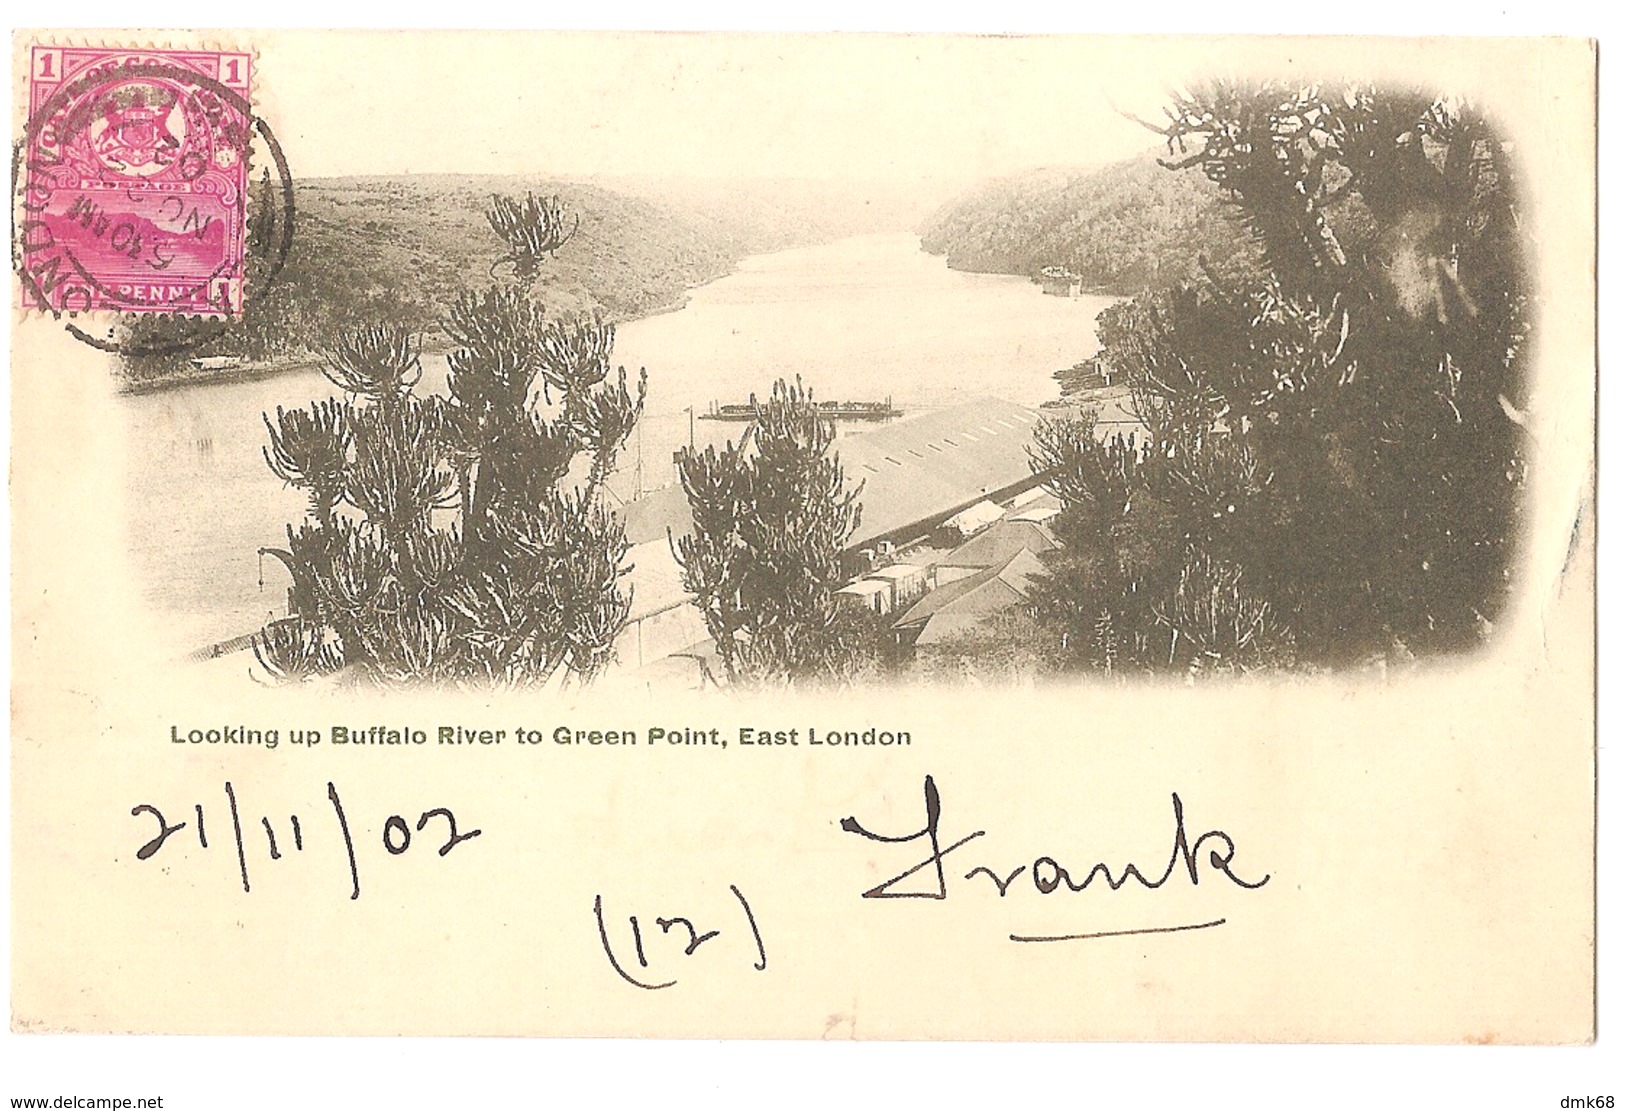 SOUTH AFRICA - EAST LONDON - LOOKING UP BUFFALO RIVER TO GREEN POINT - STAMP - MAILED TO ITALY 1902 - ( 2785) - South Africa